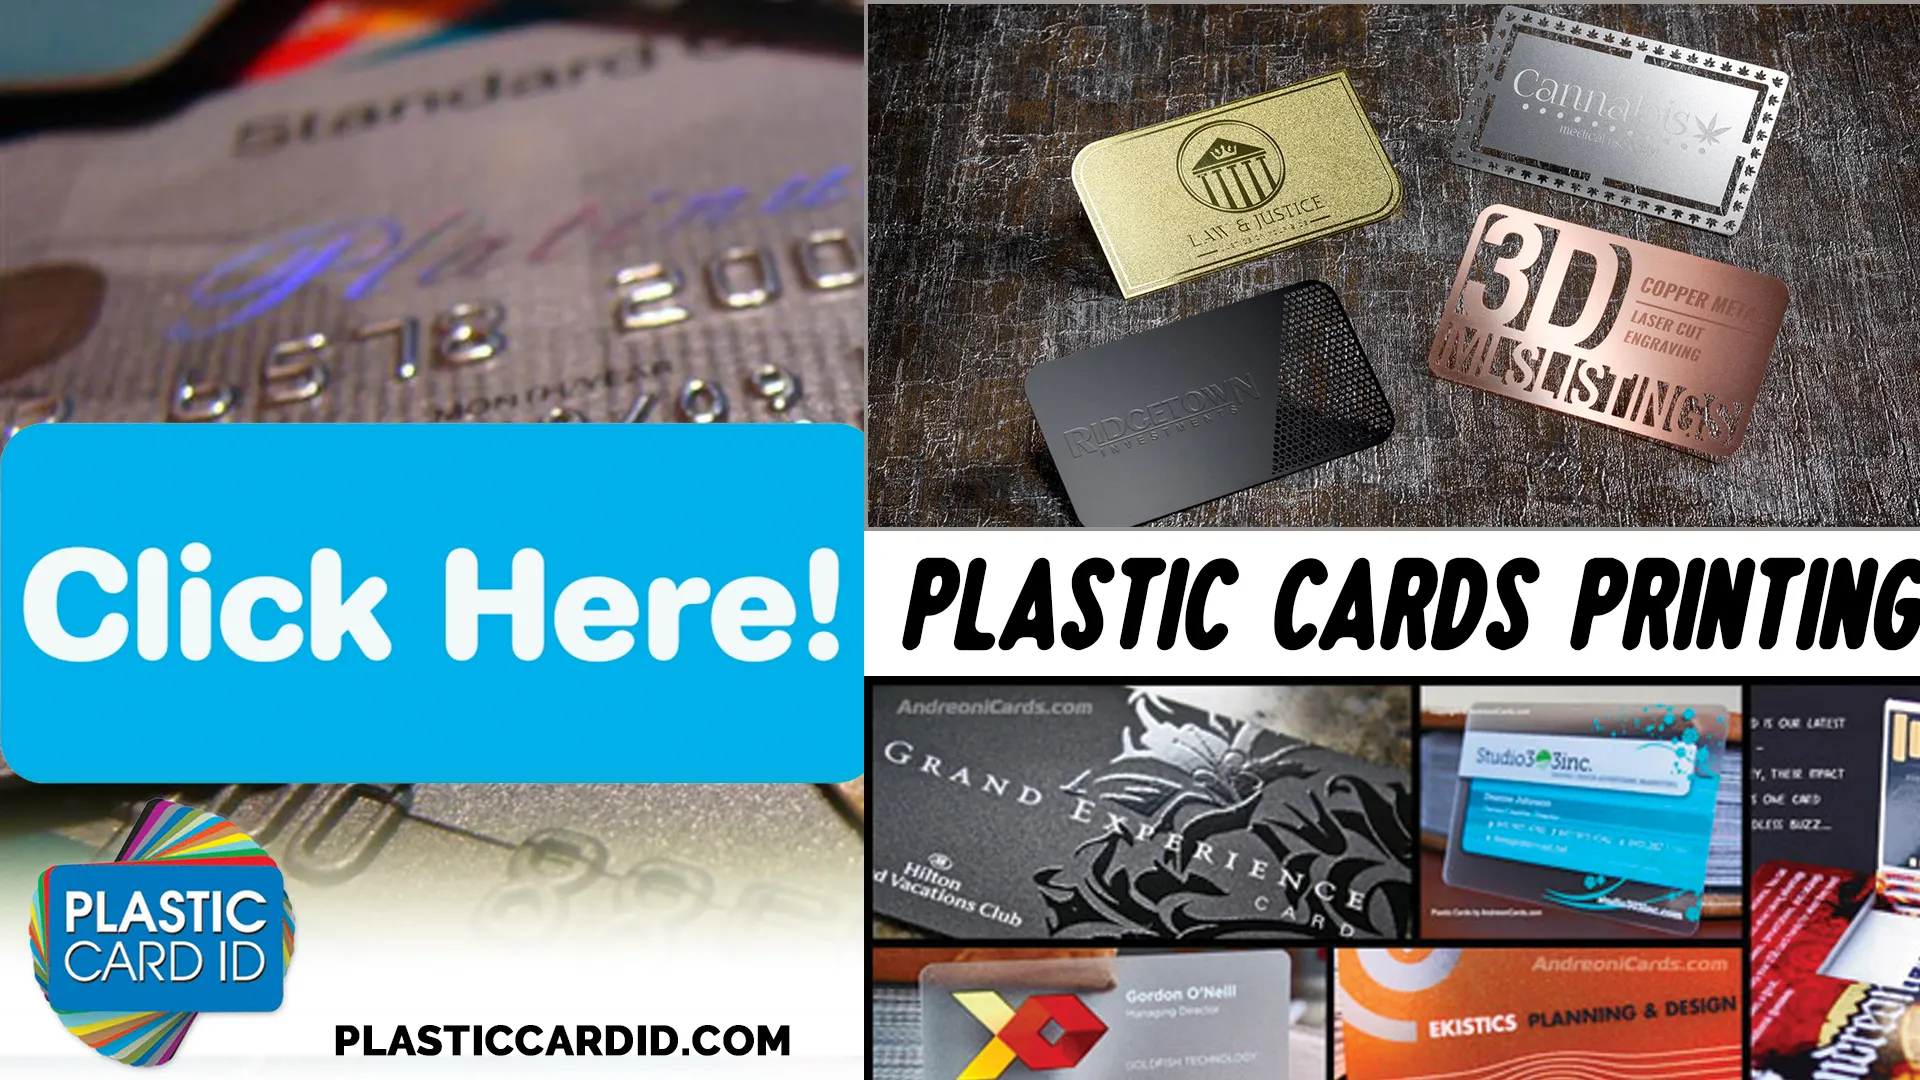 Comprehensive Accessory Options for Plastic Cards